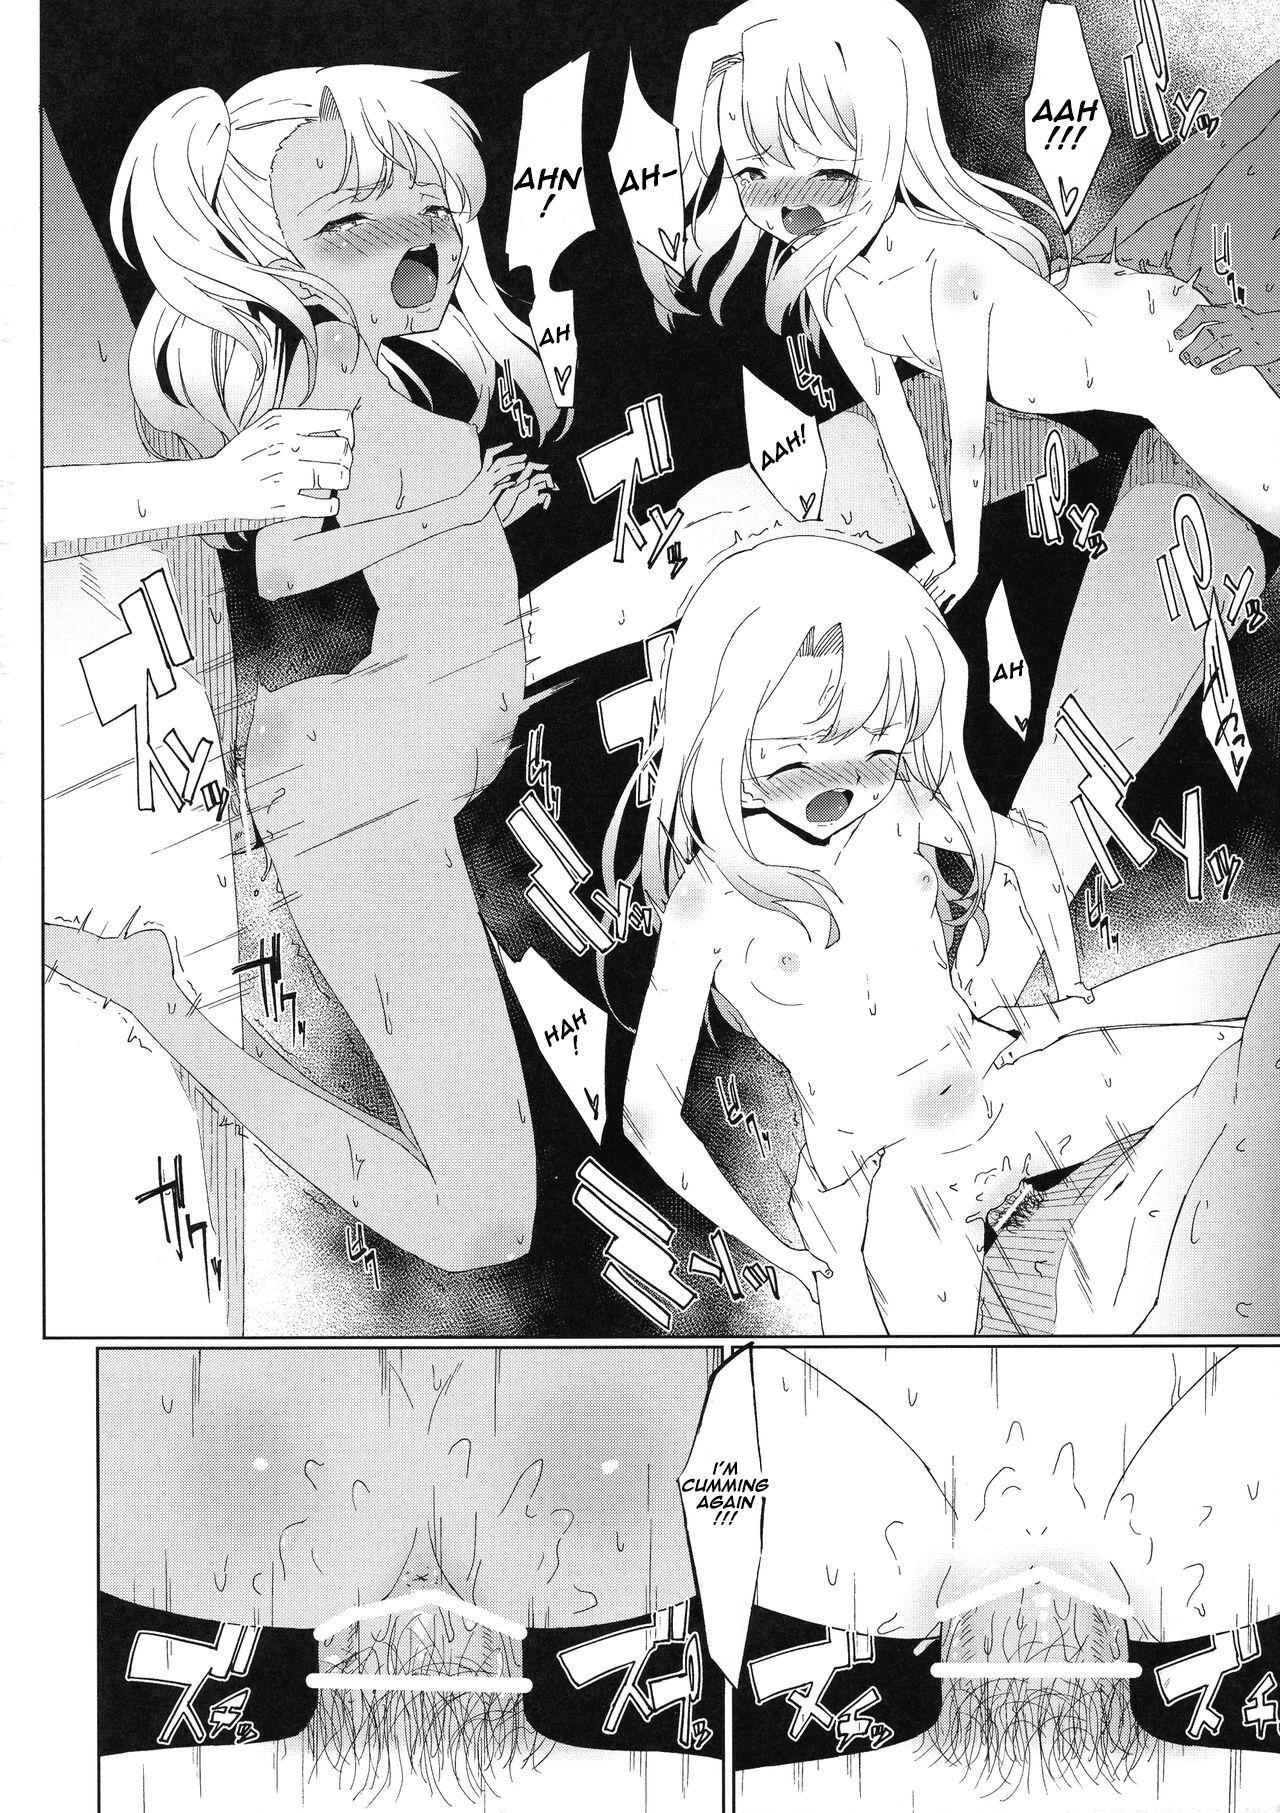 Jerking Off Oshiete Onii-chan - Fate kaleid liner prisma illya Perra - Page 10